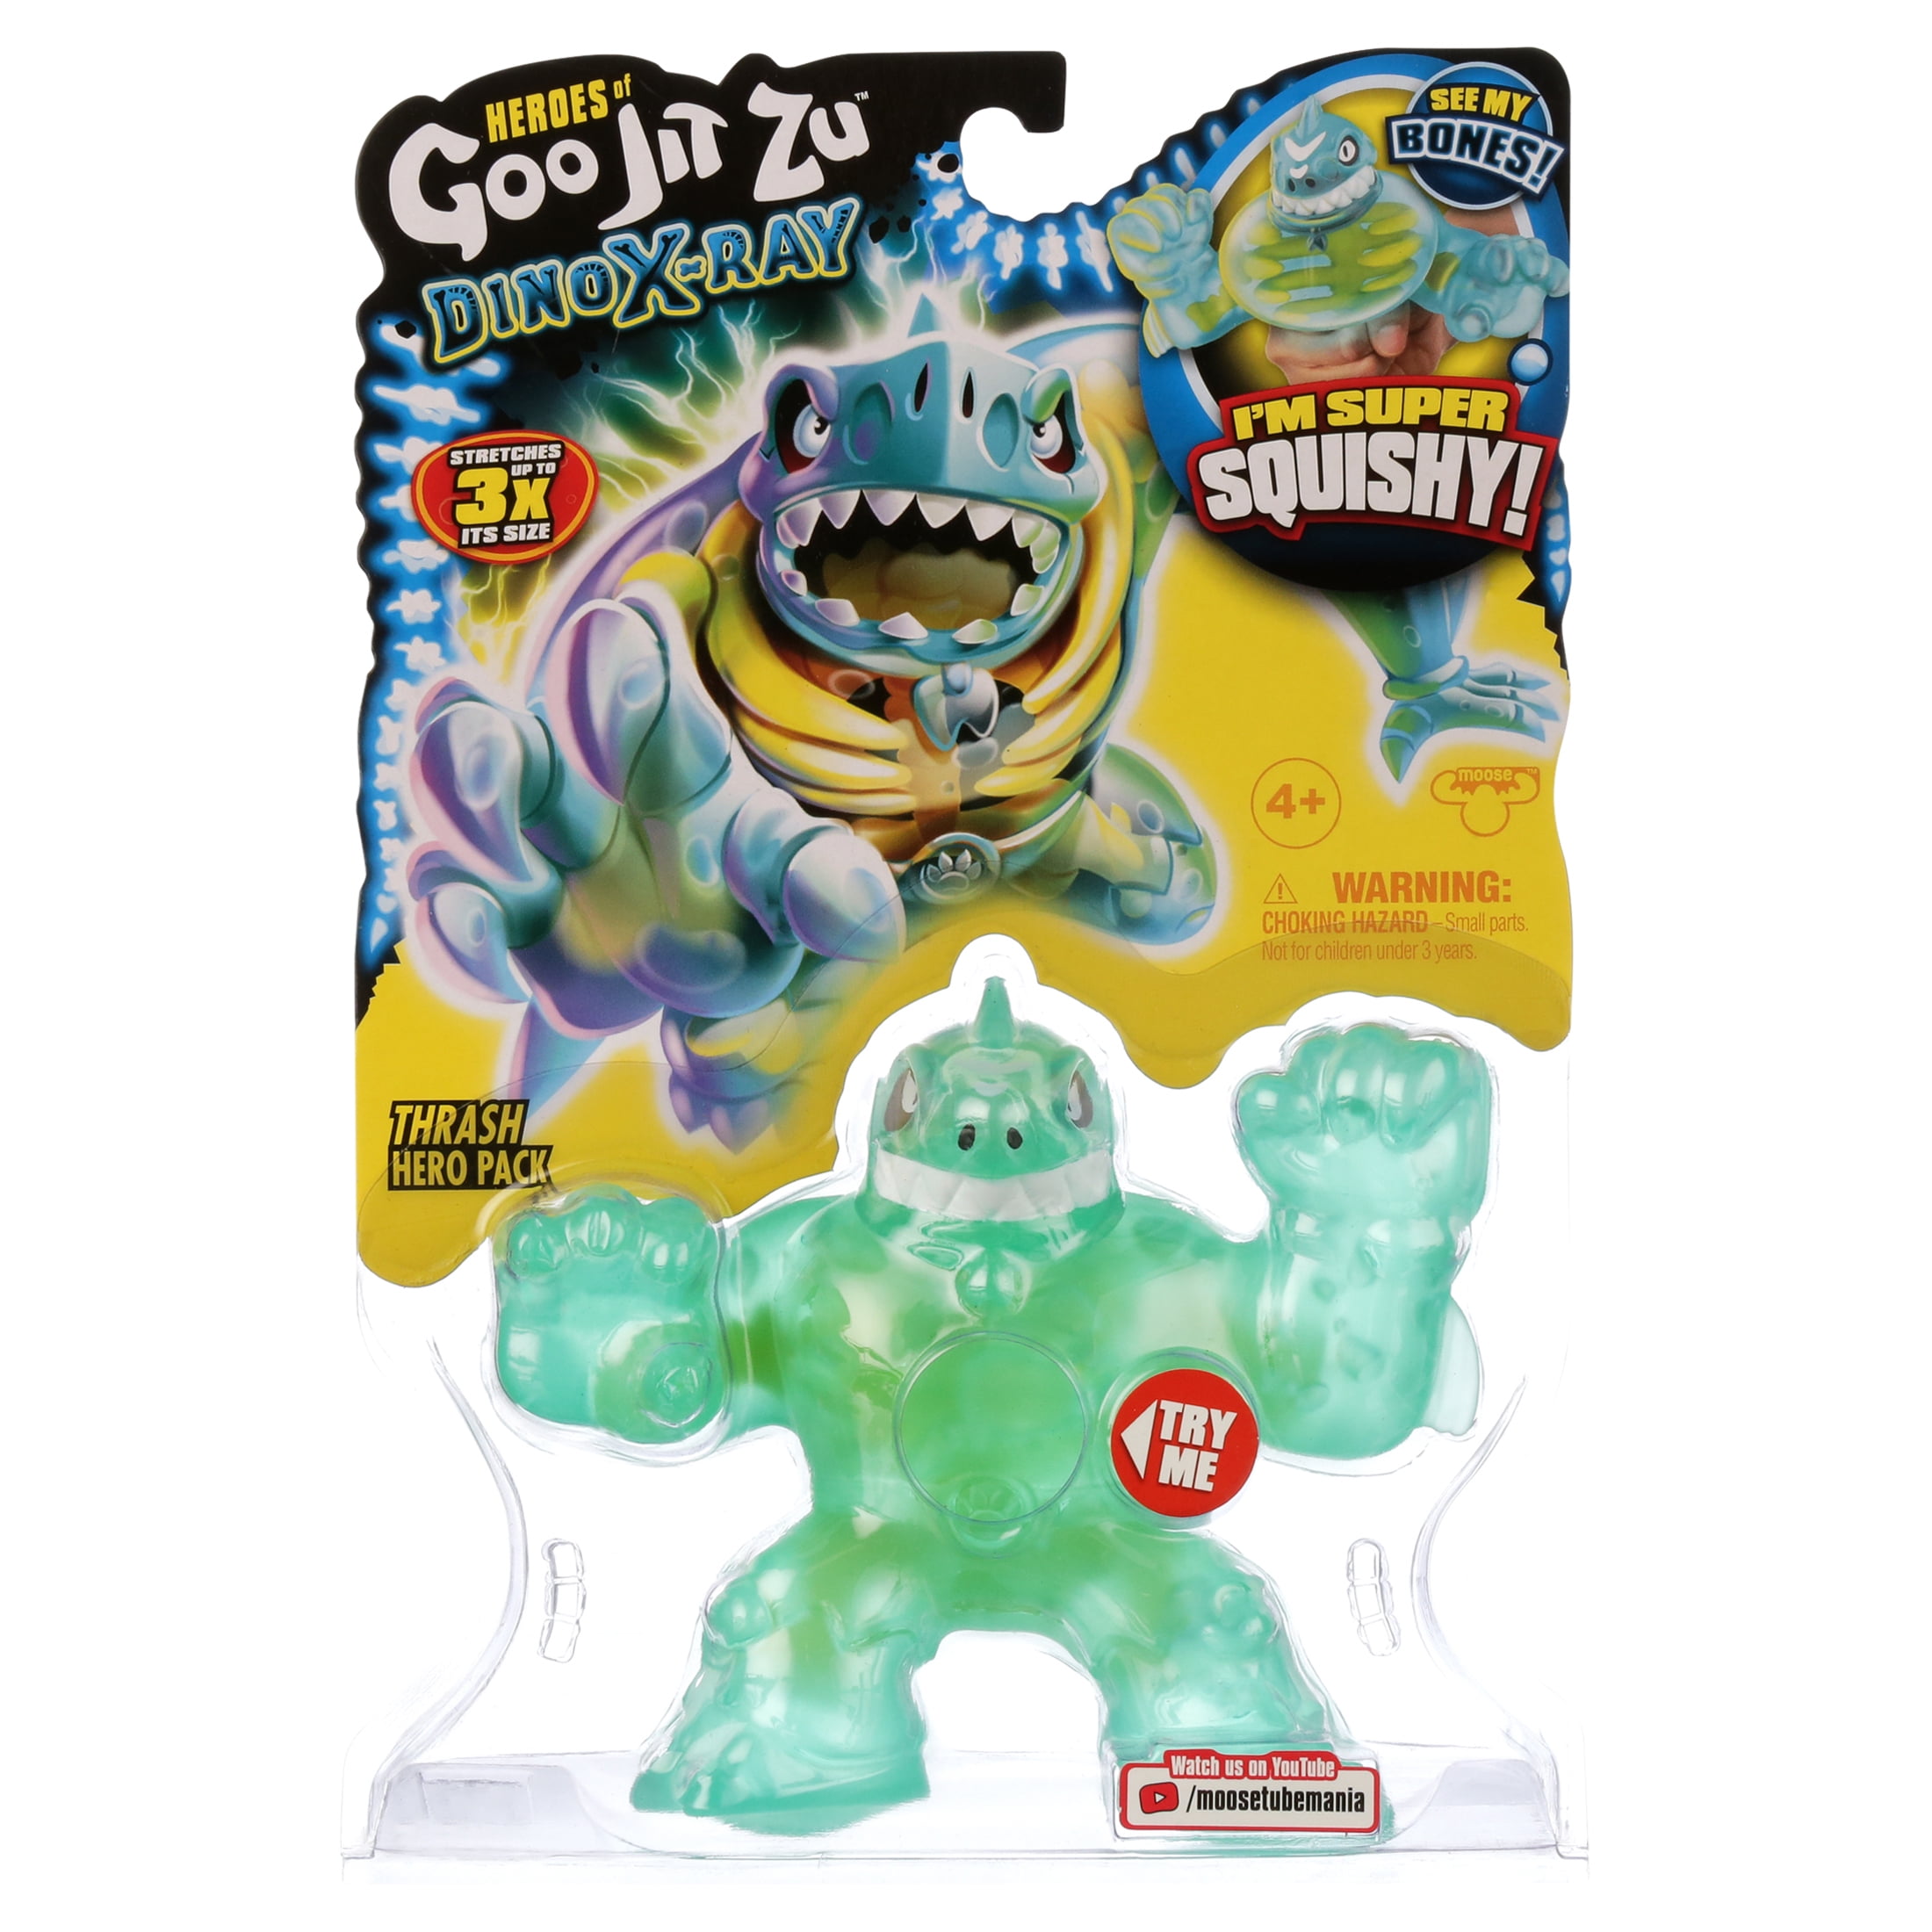 Heroes of Goo Jit Zu Dino X-Ray, Figurine d'action – Thrash le requin,  multicolore (41186)